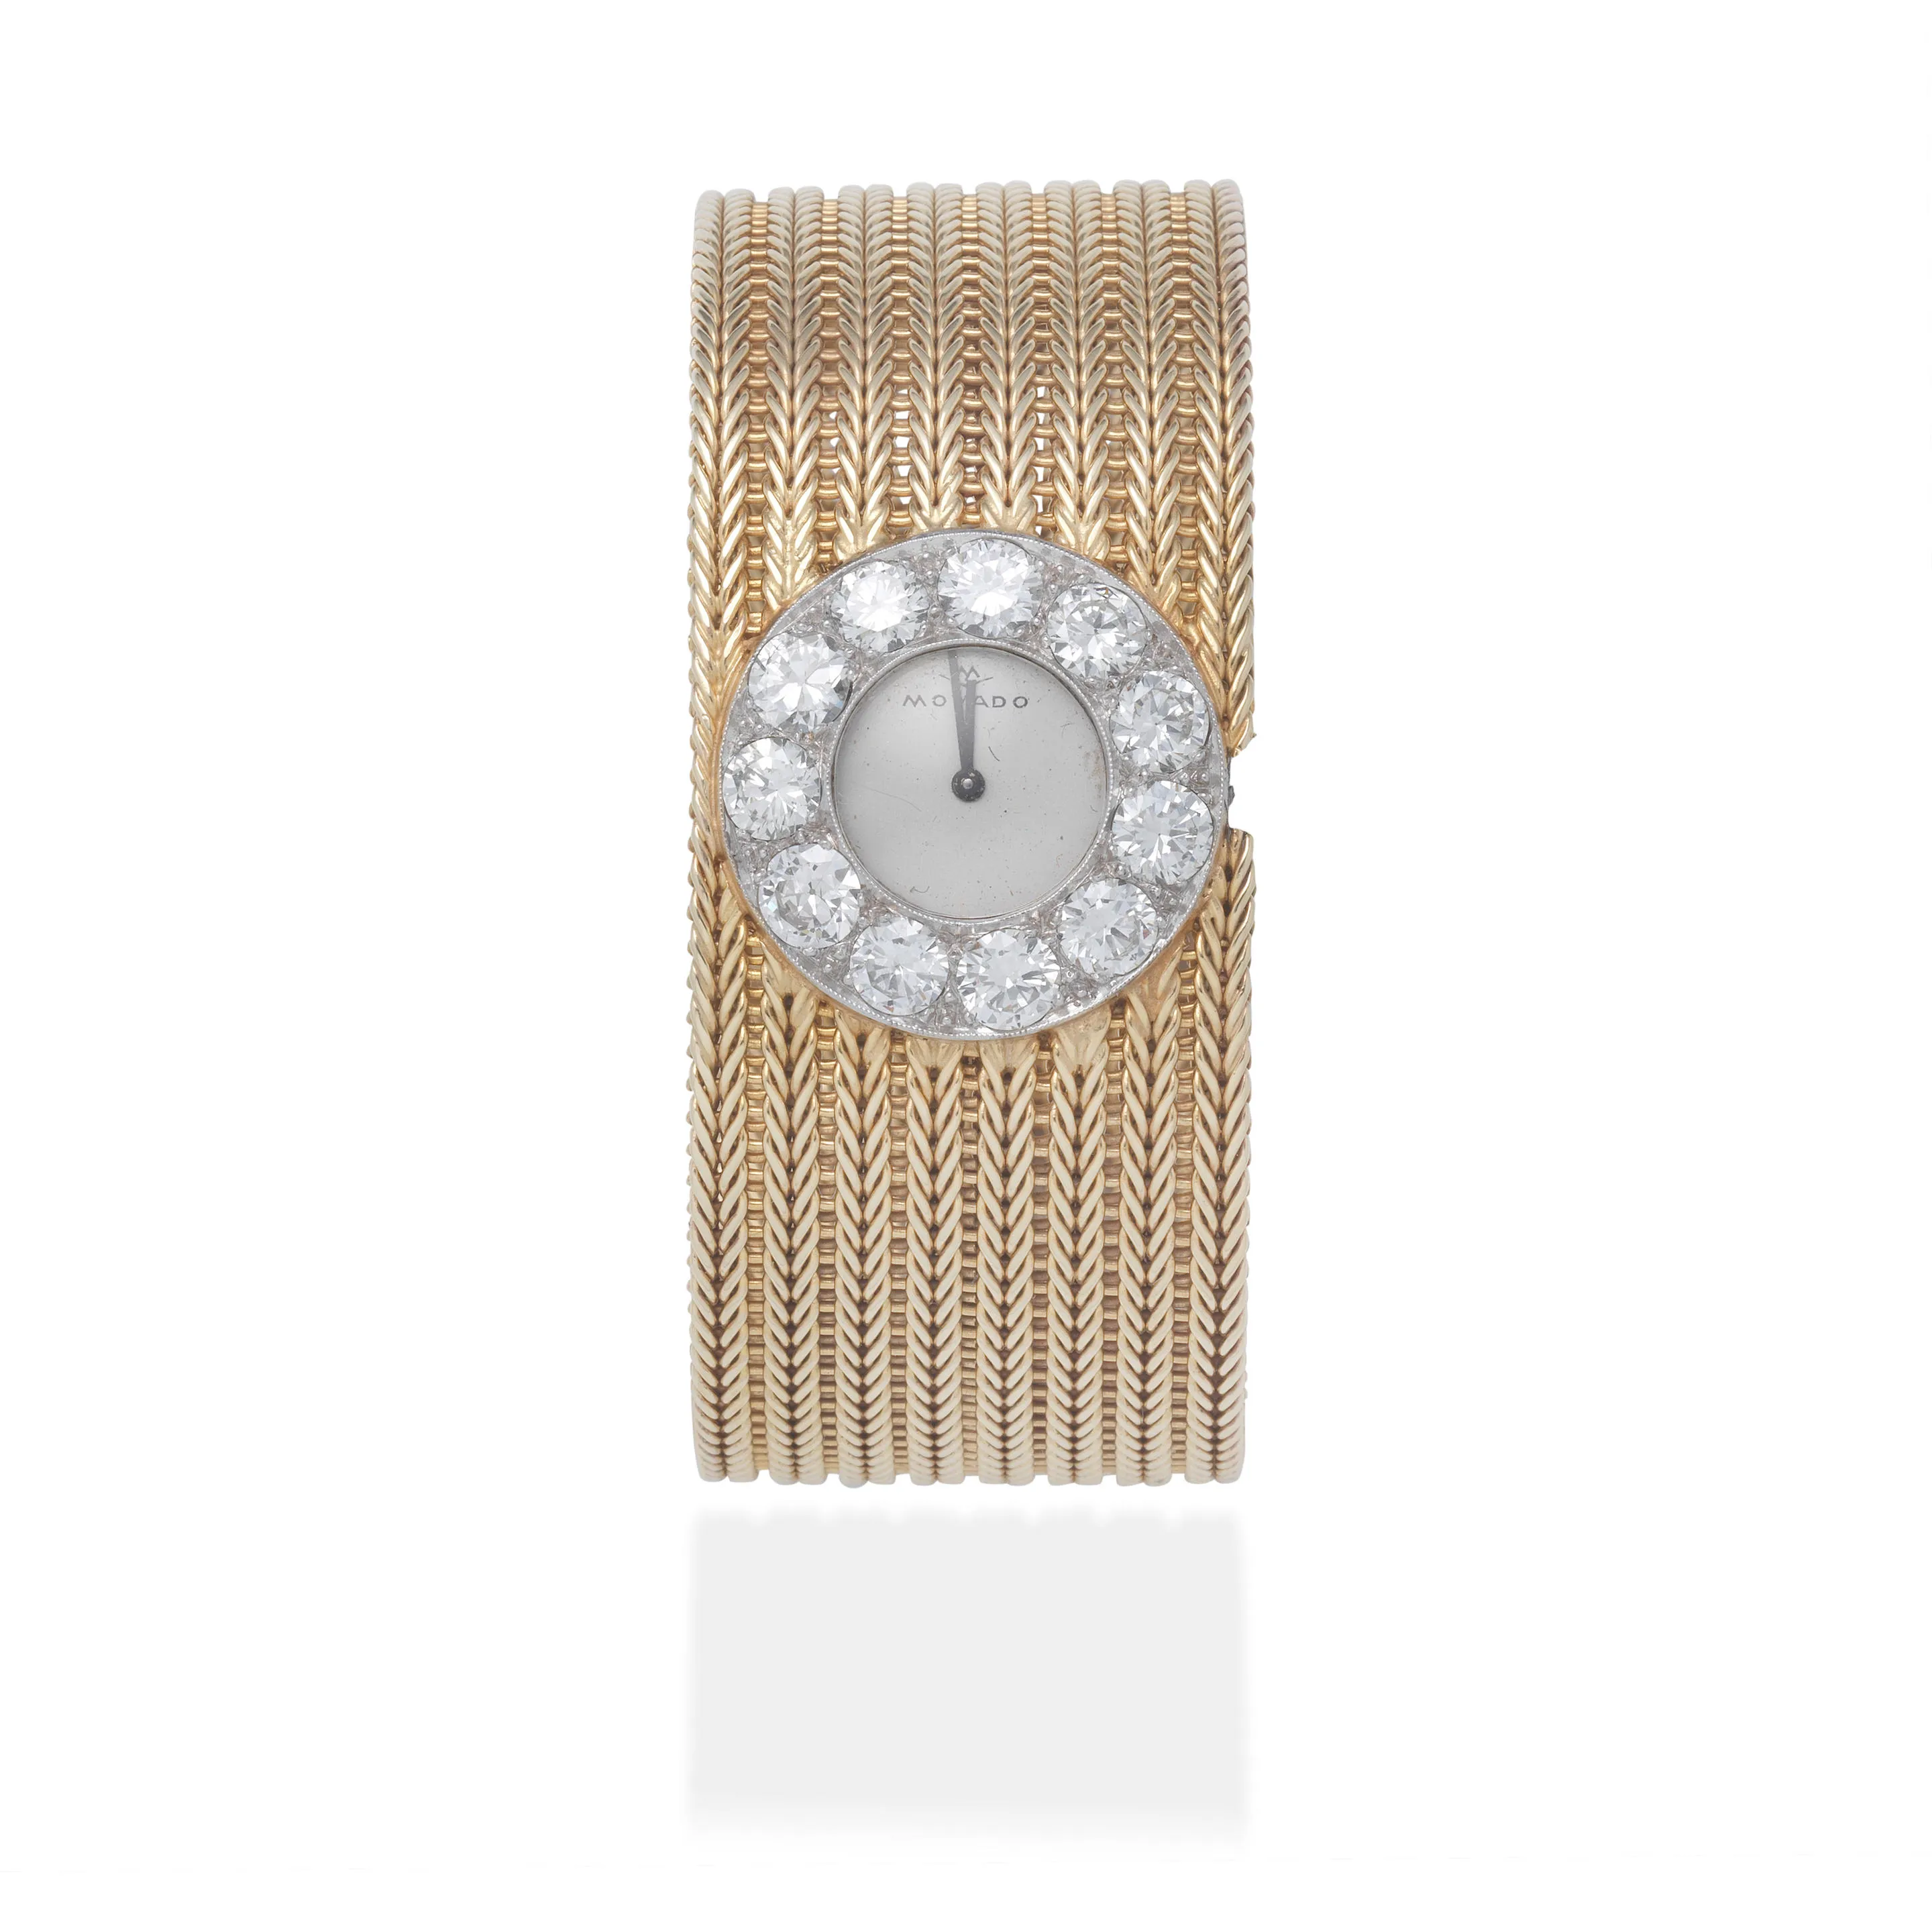 Movado :- nullmm Yellow gold and diamond-set